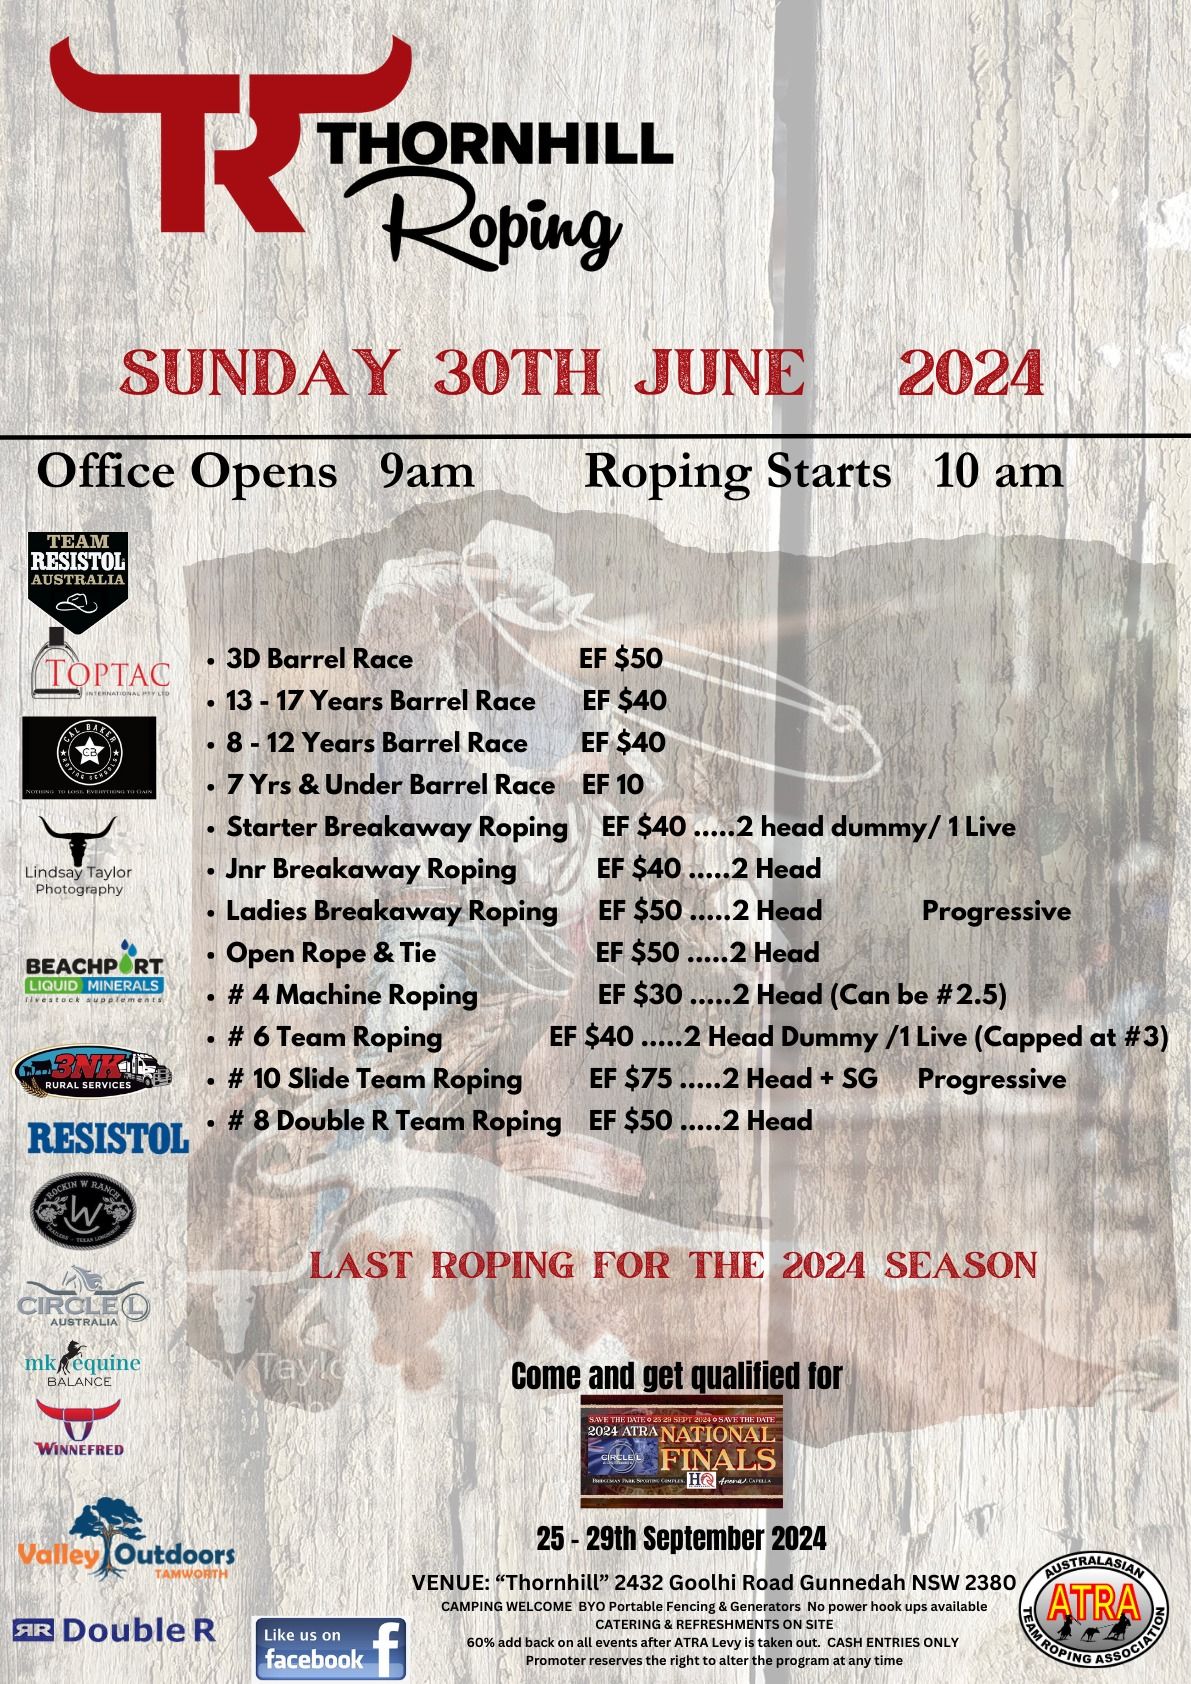 Thornhill Roping 30th June 2024